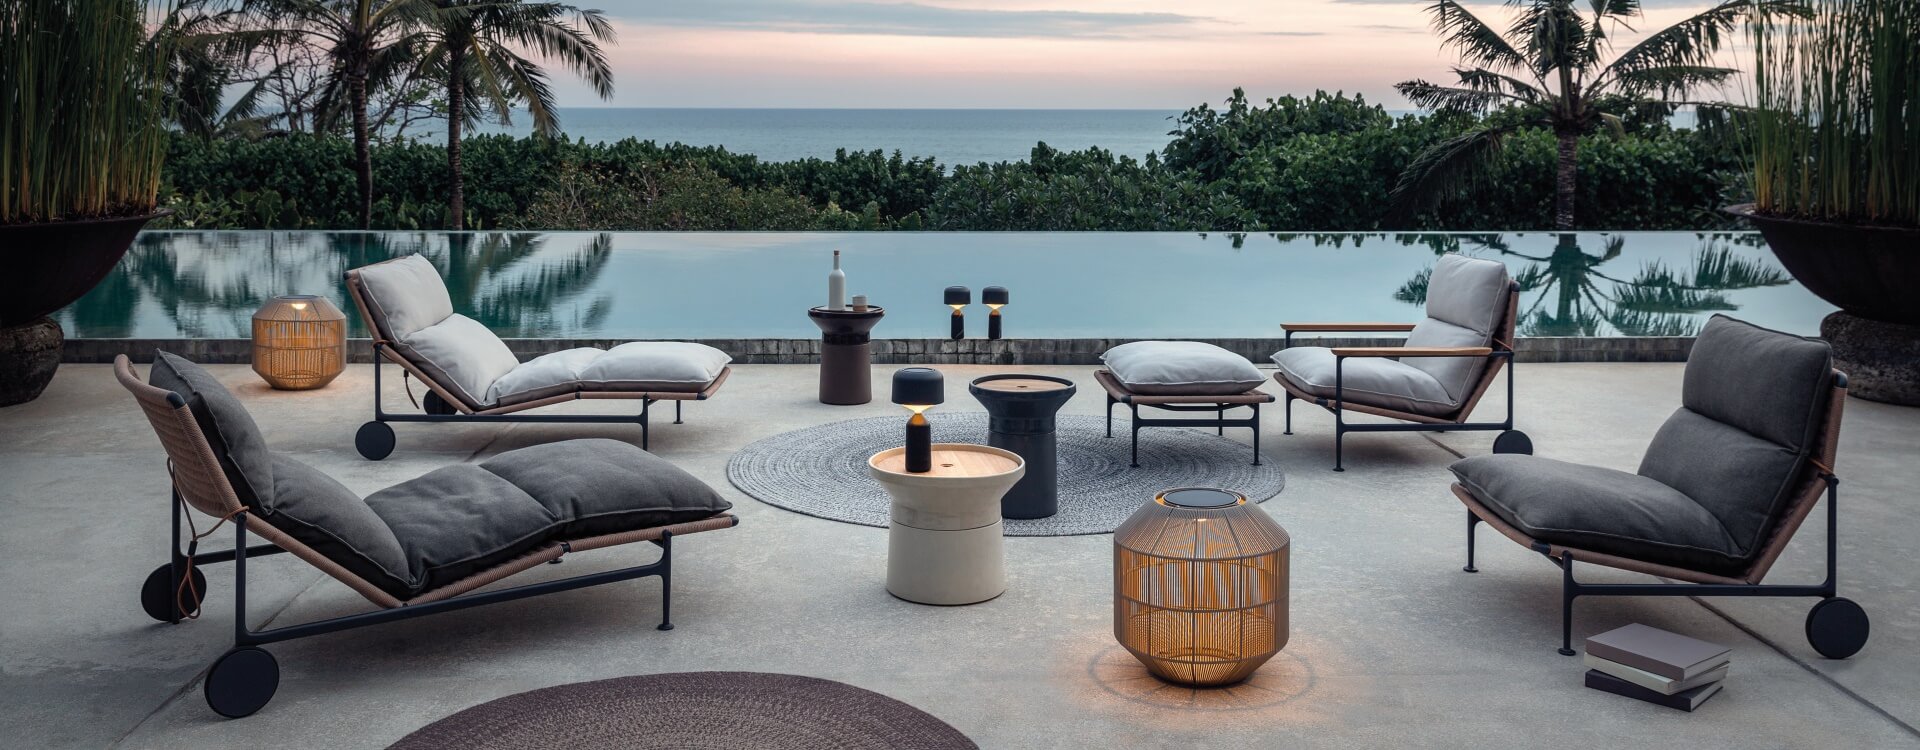 Everything Under The Sun Premium Outdoor Furniture in Hong Kong